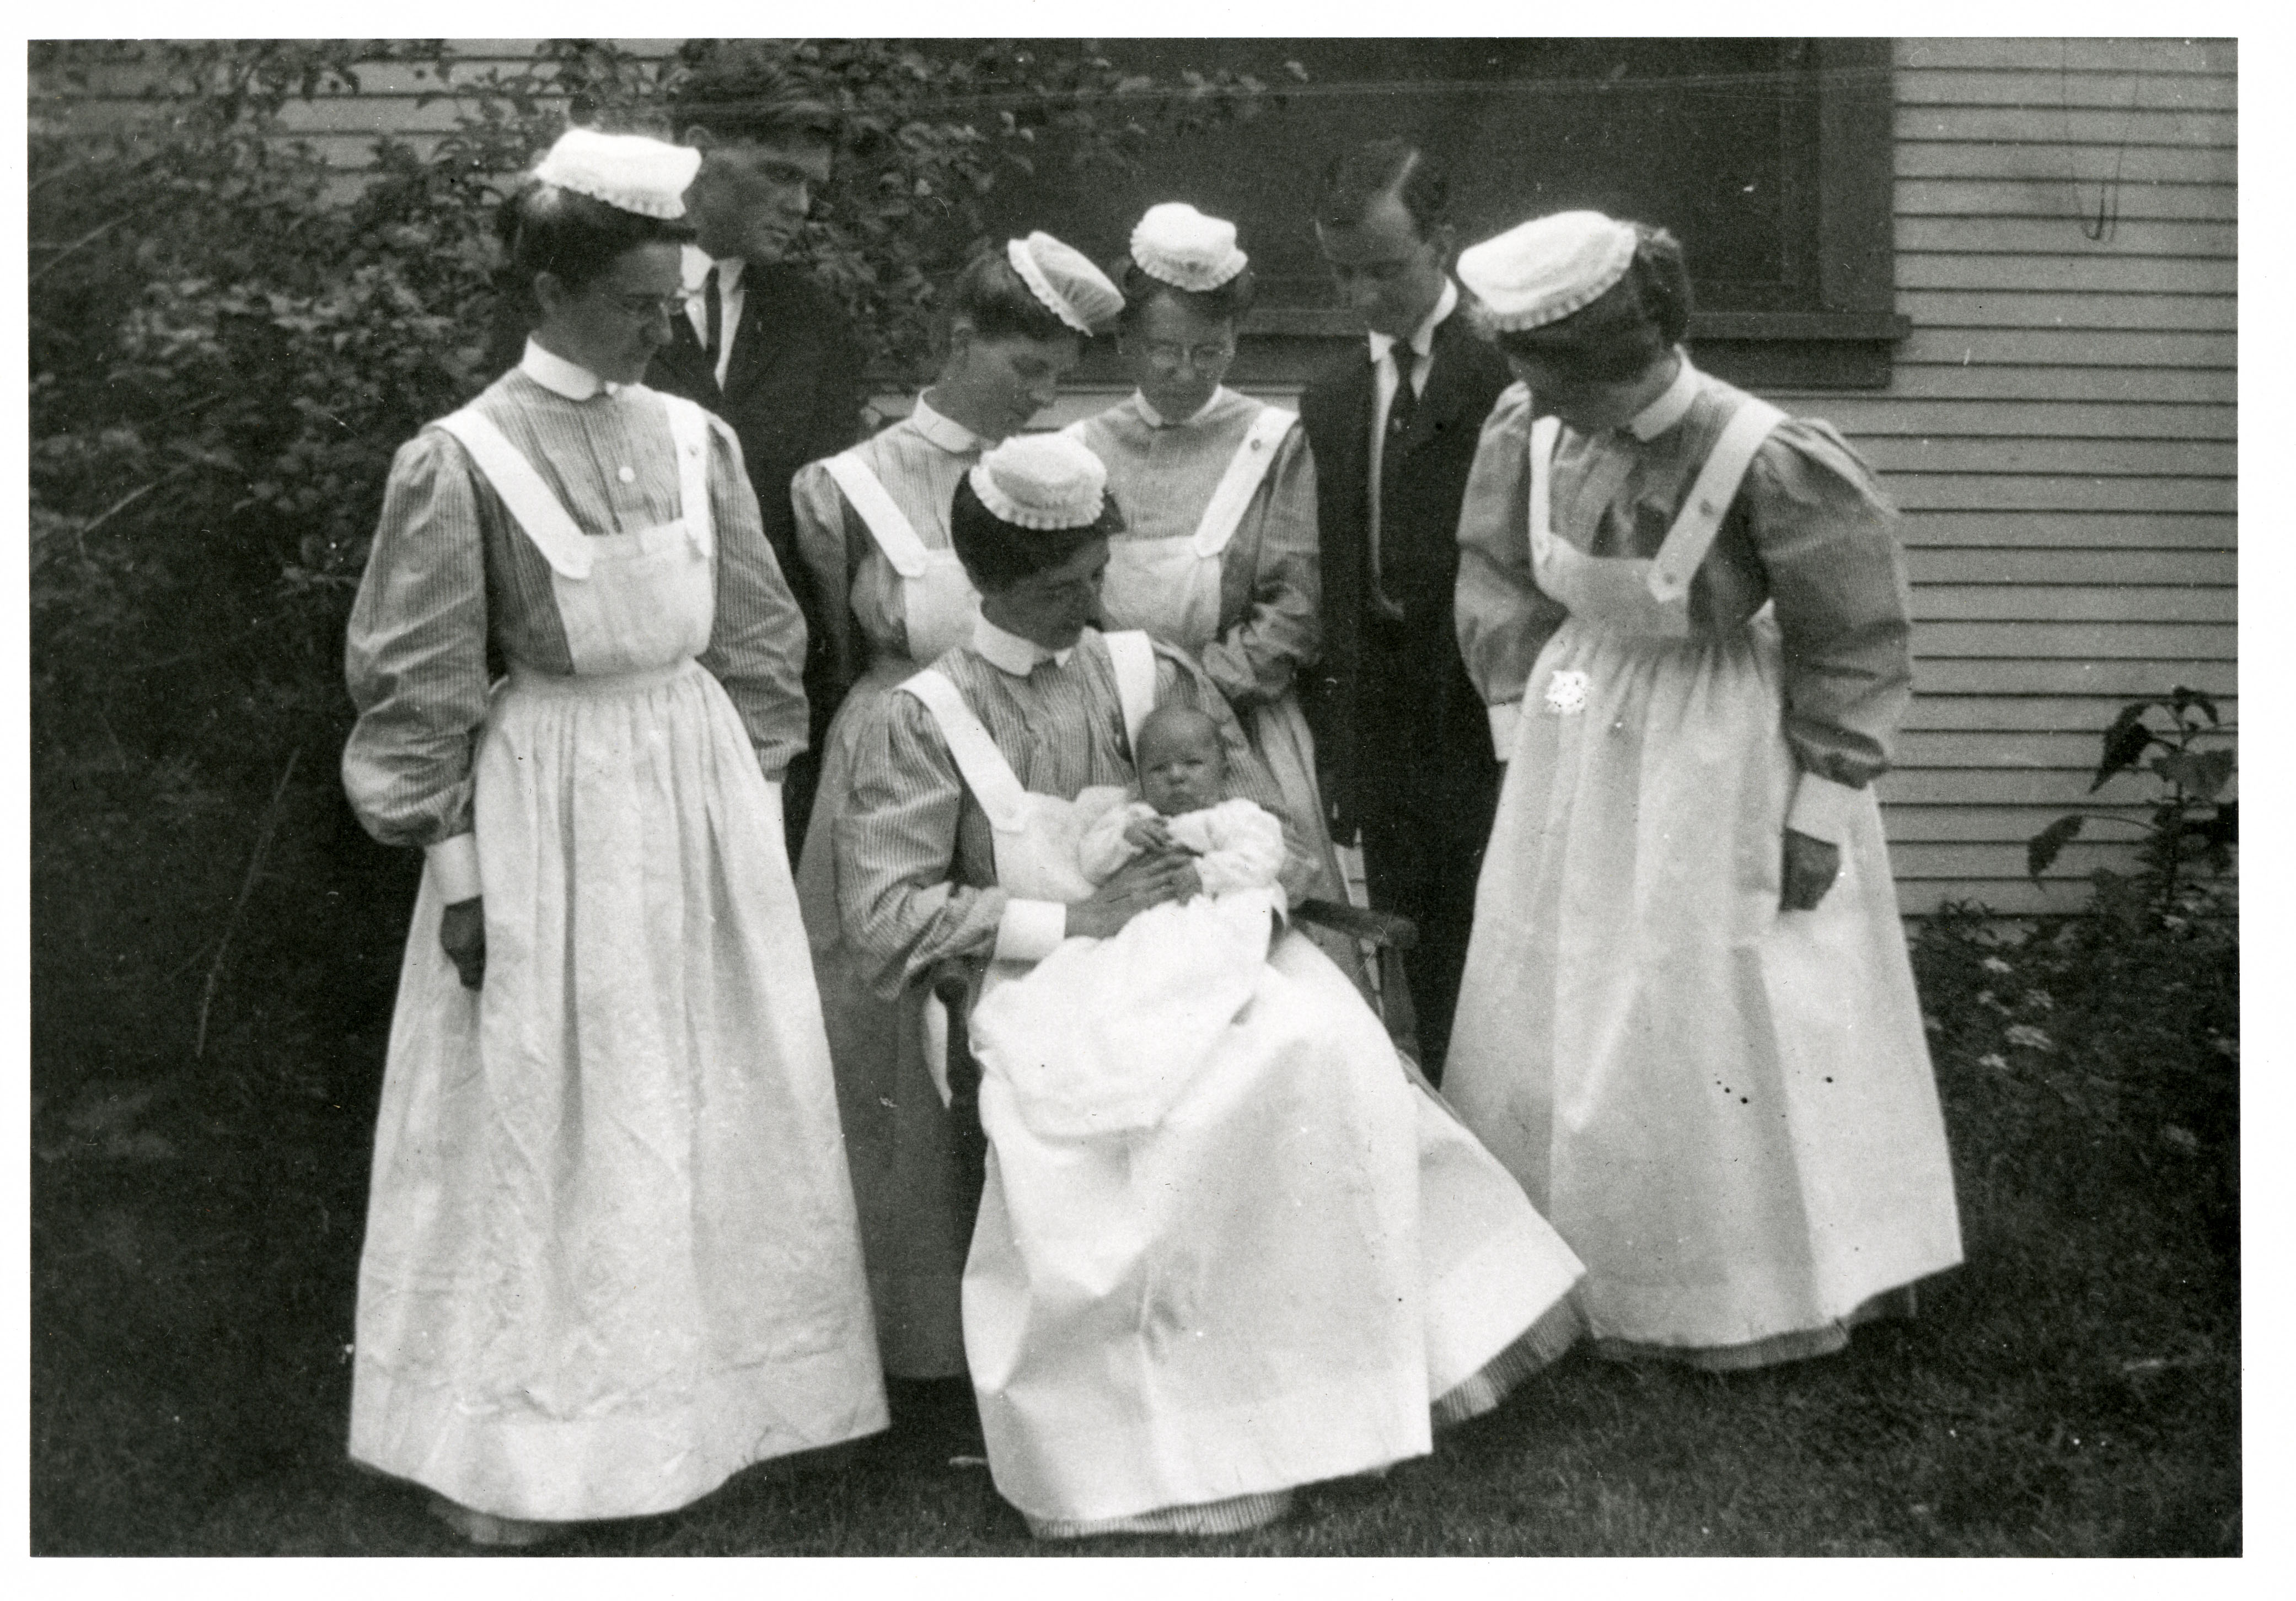 Circa 1907, the first nursing class at the College of Medical Evangelist with baby Richard Edward Abbott